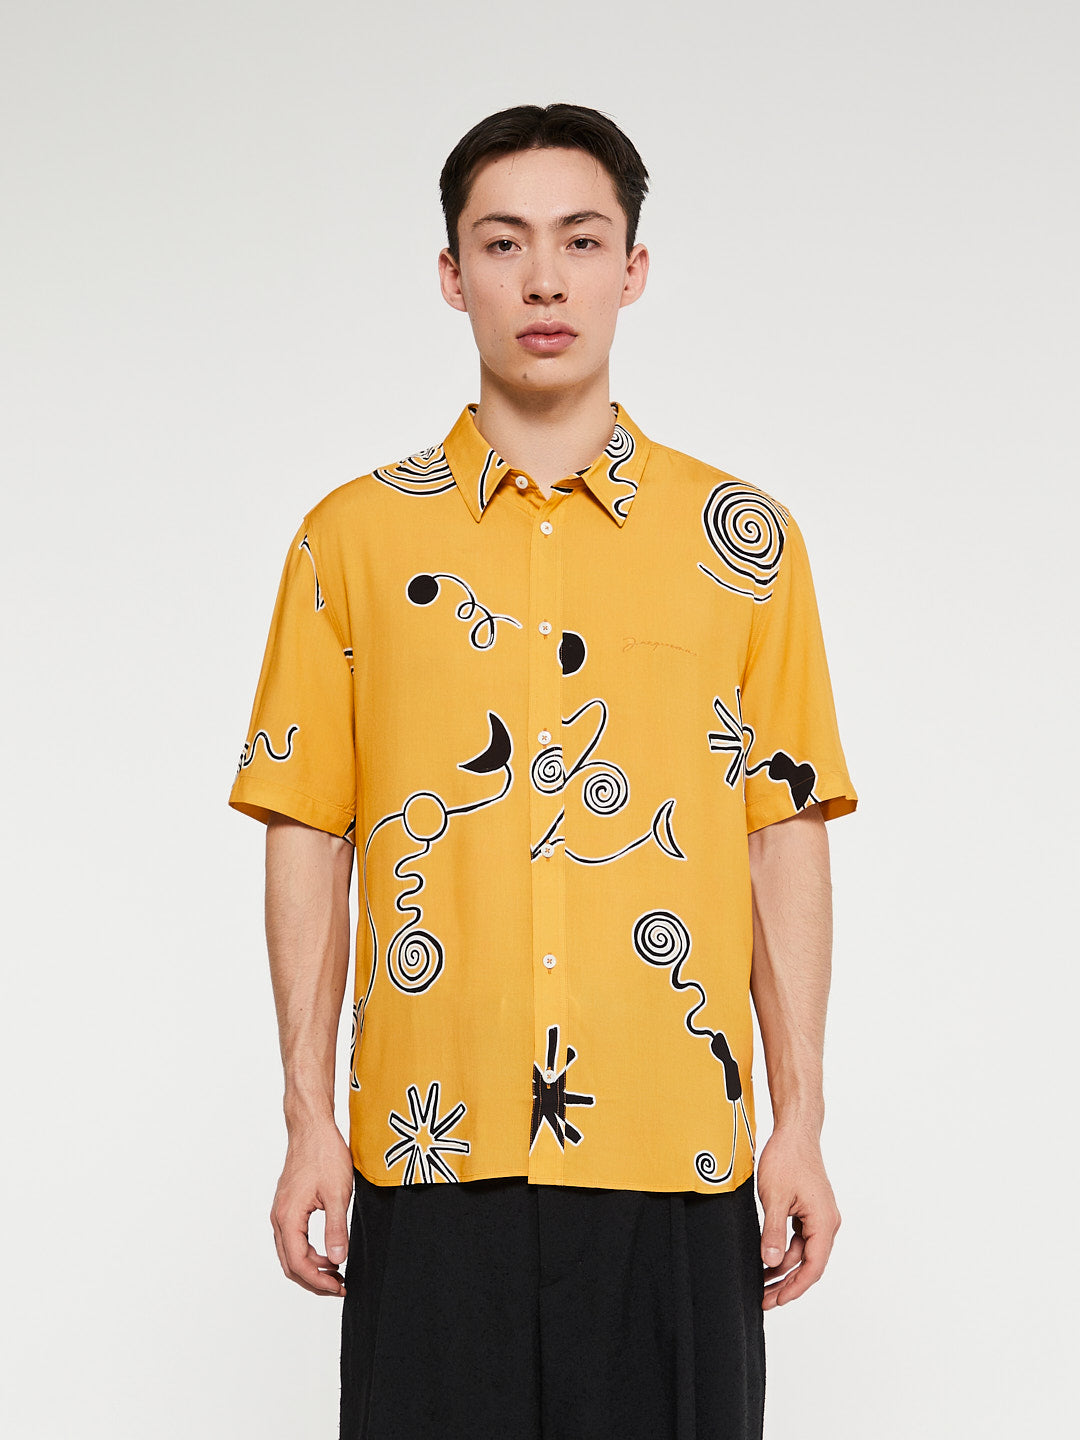 Jacquemus - La Chemise Melo Shirt in Arty Spiral Black and Orange